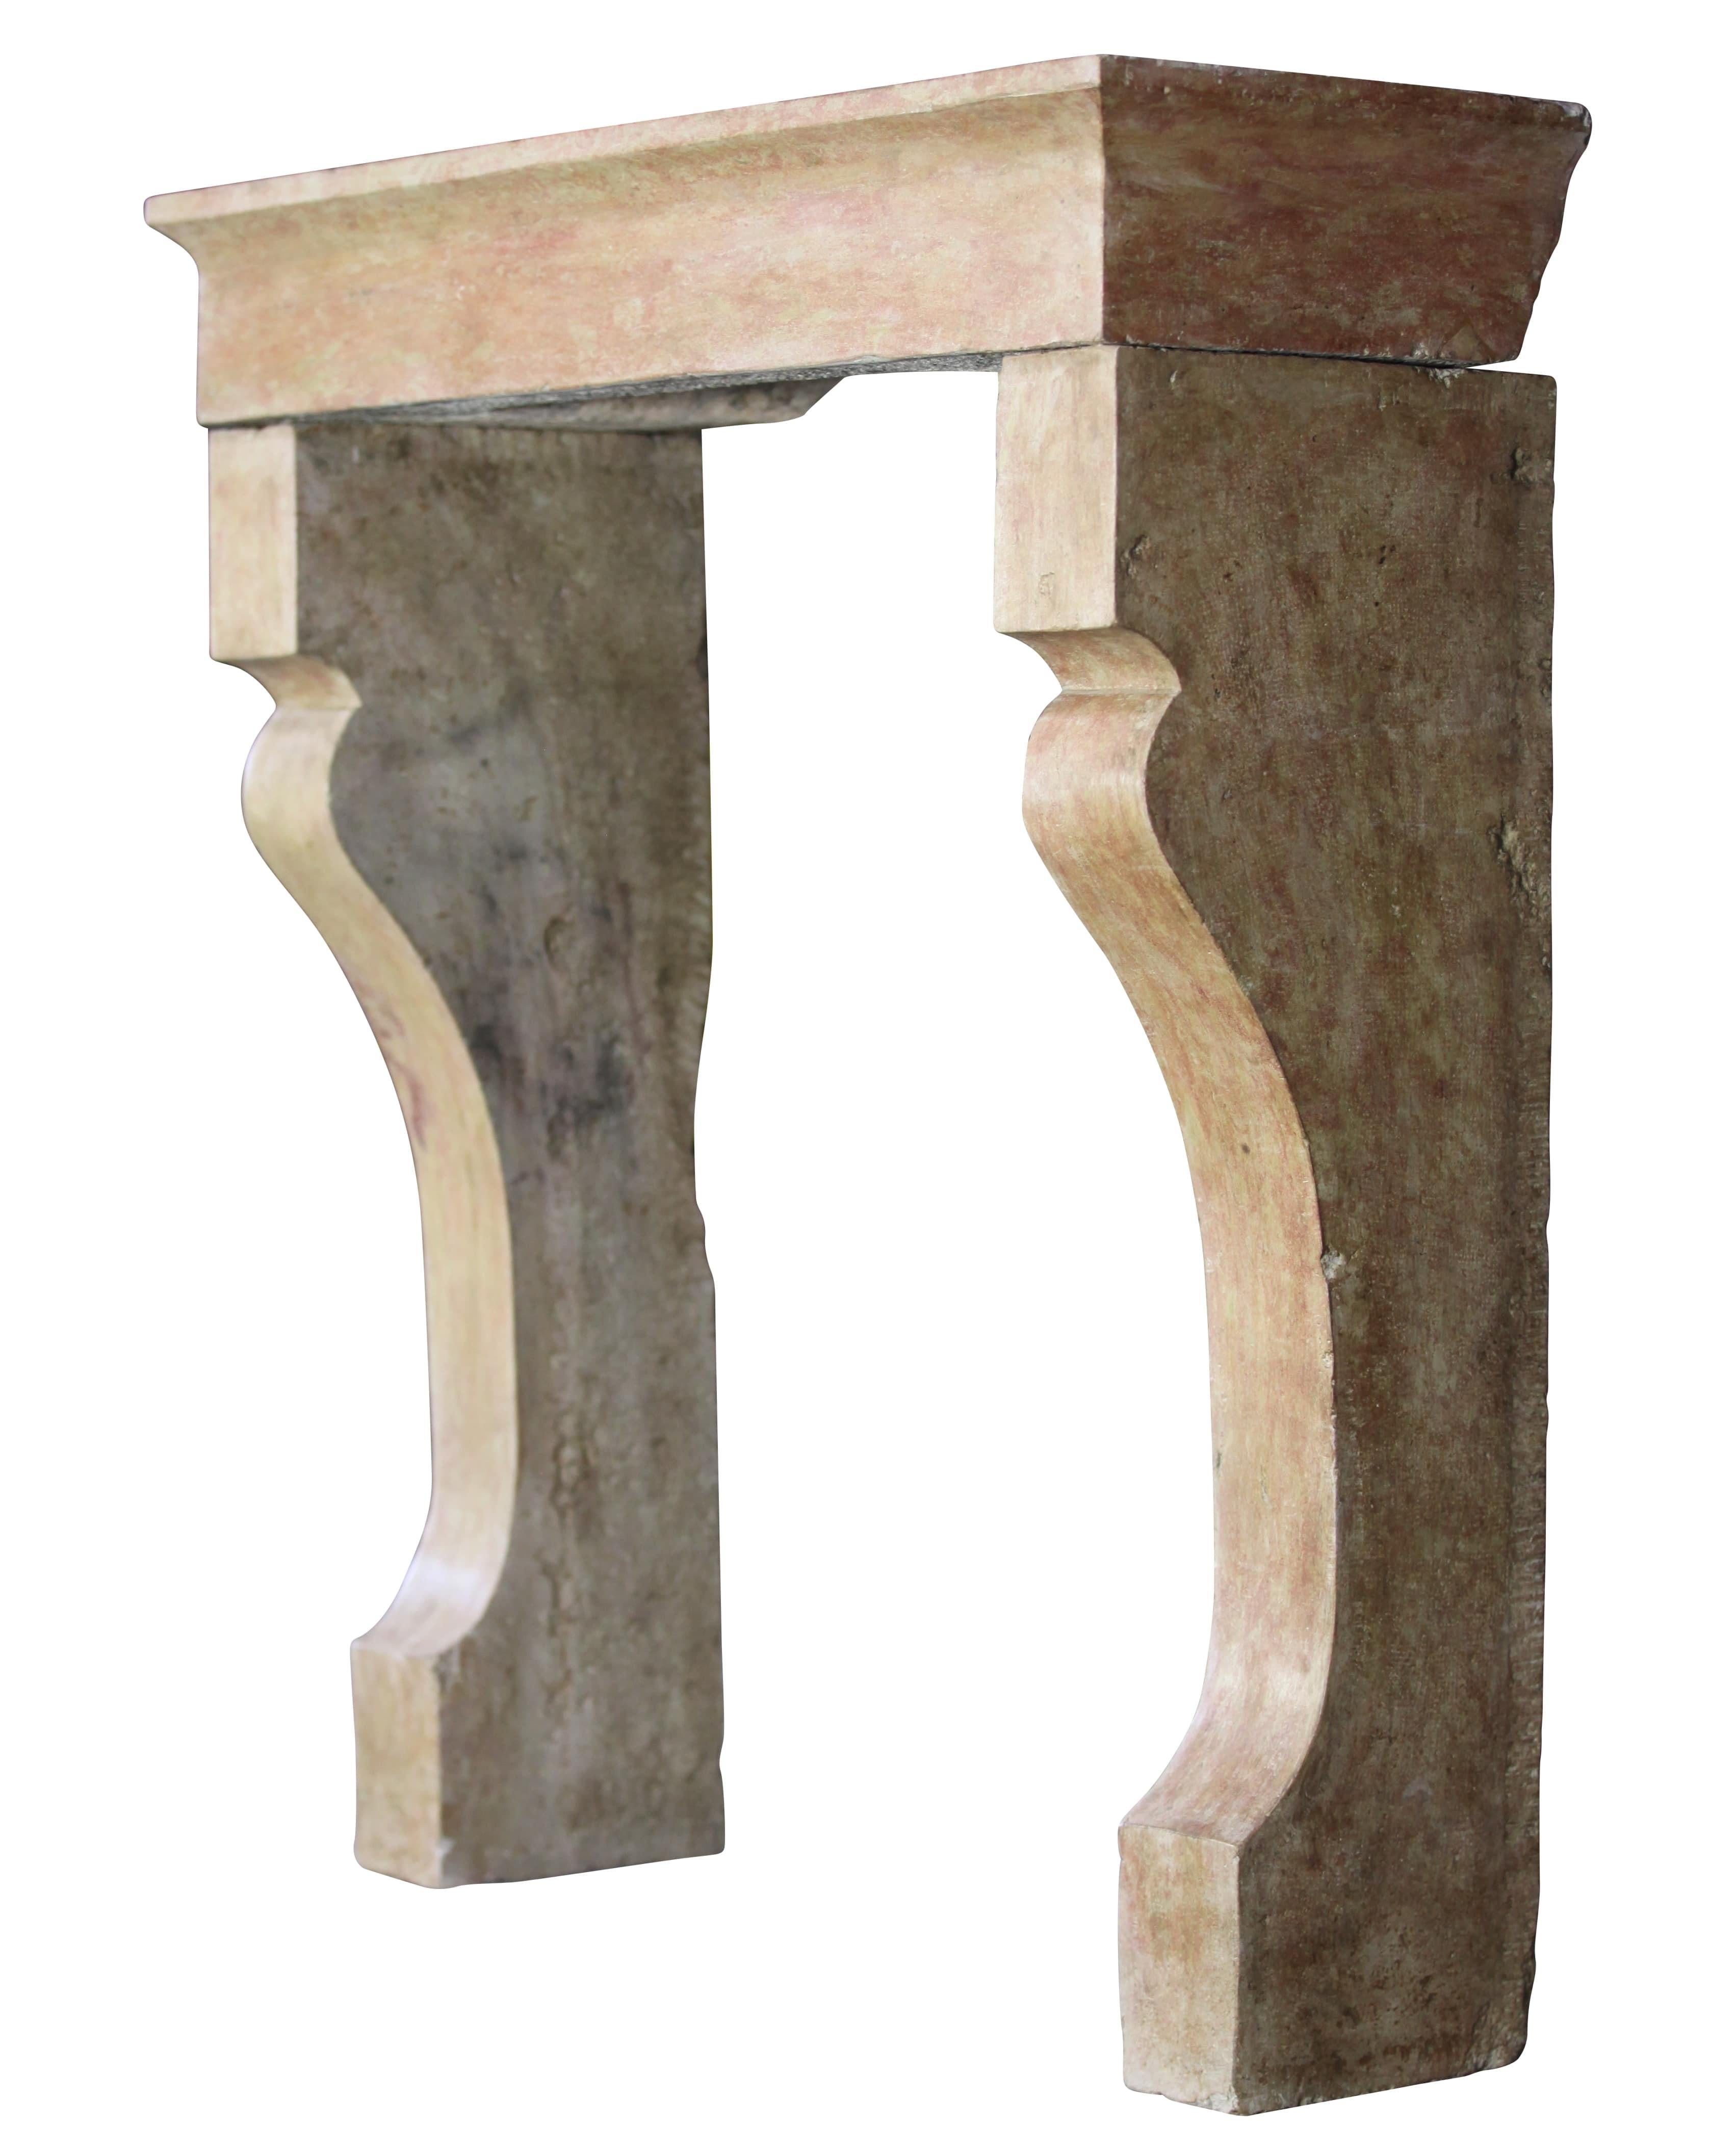 This French country however elegant original fire surround has been made out of 3 solid blocks in a Burgundy hard stone/marble. It origins of the Louis Philippe period, 19th century.
Dimensions:
101.5 cm exterior width 39.96 inch
113 cm exterior